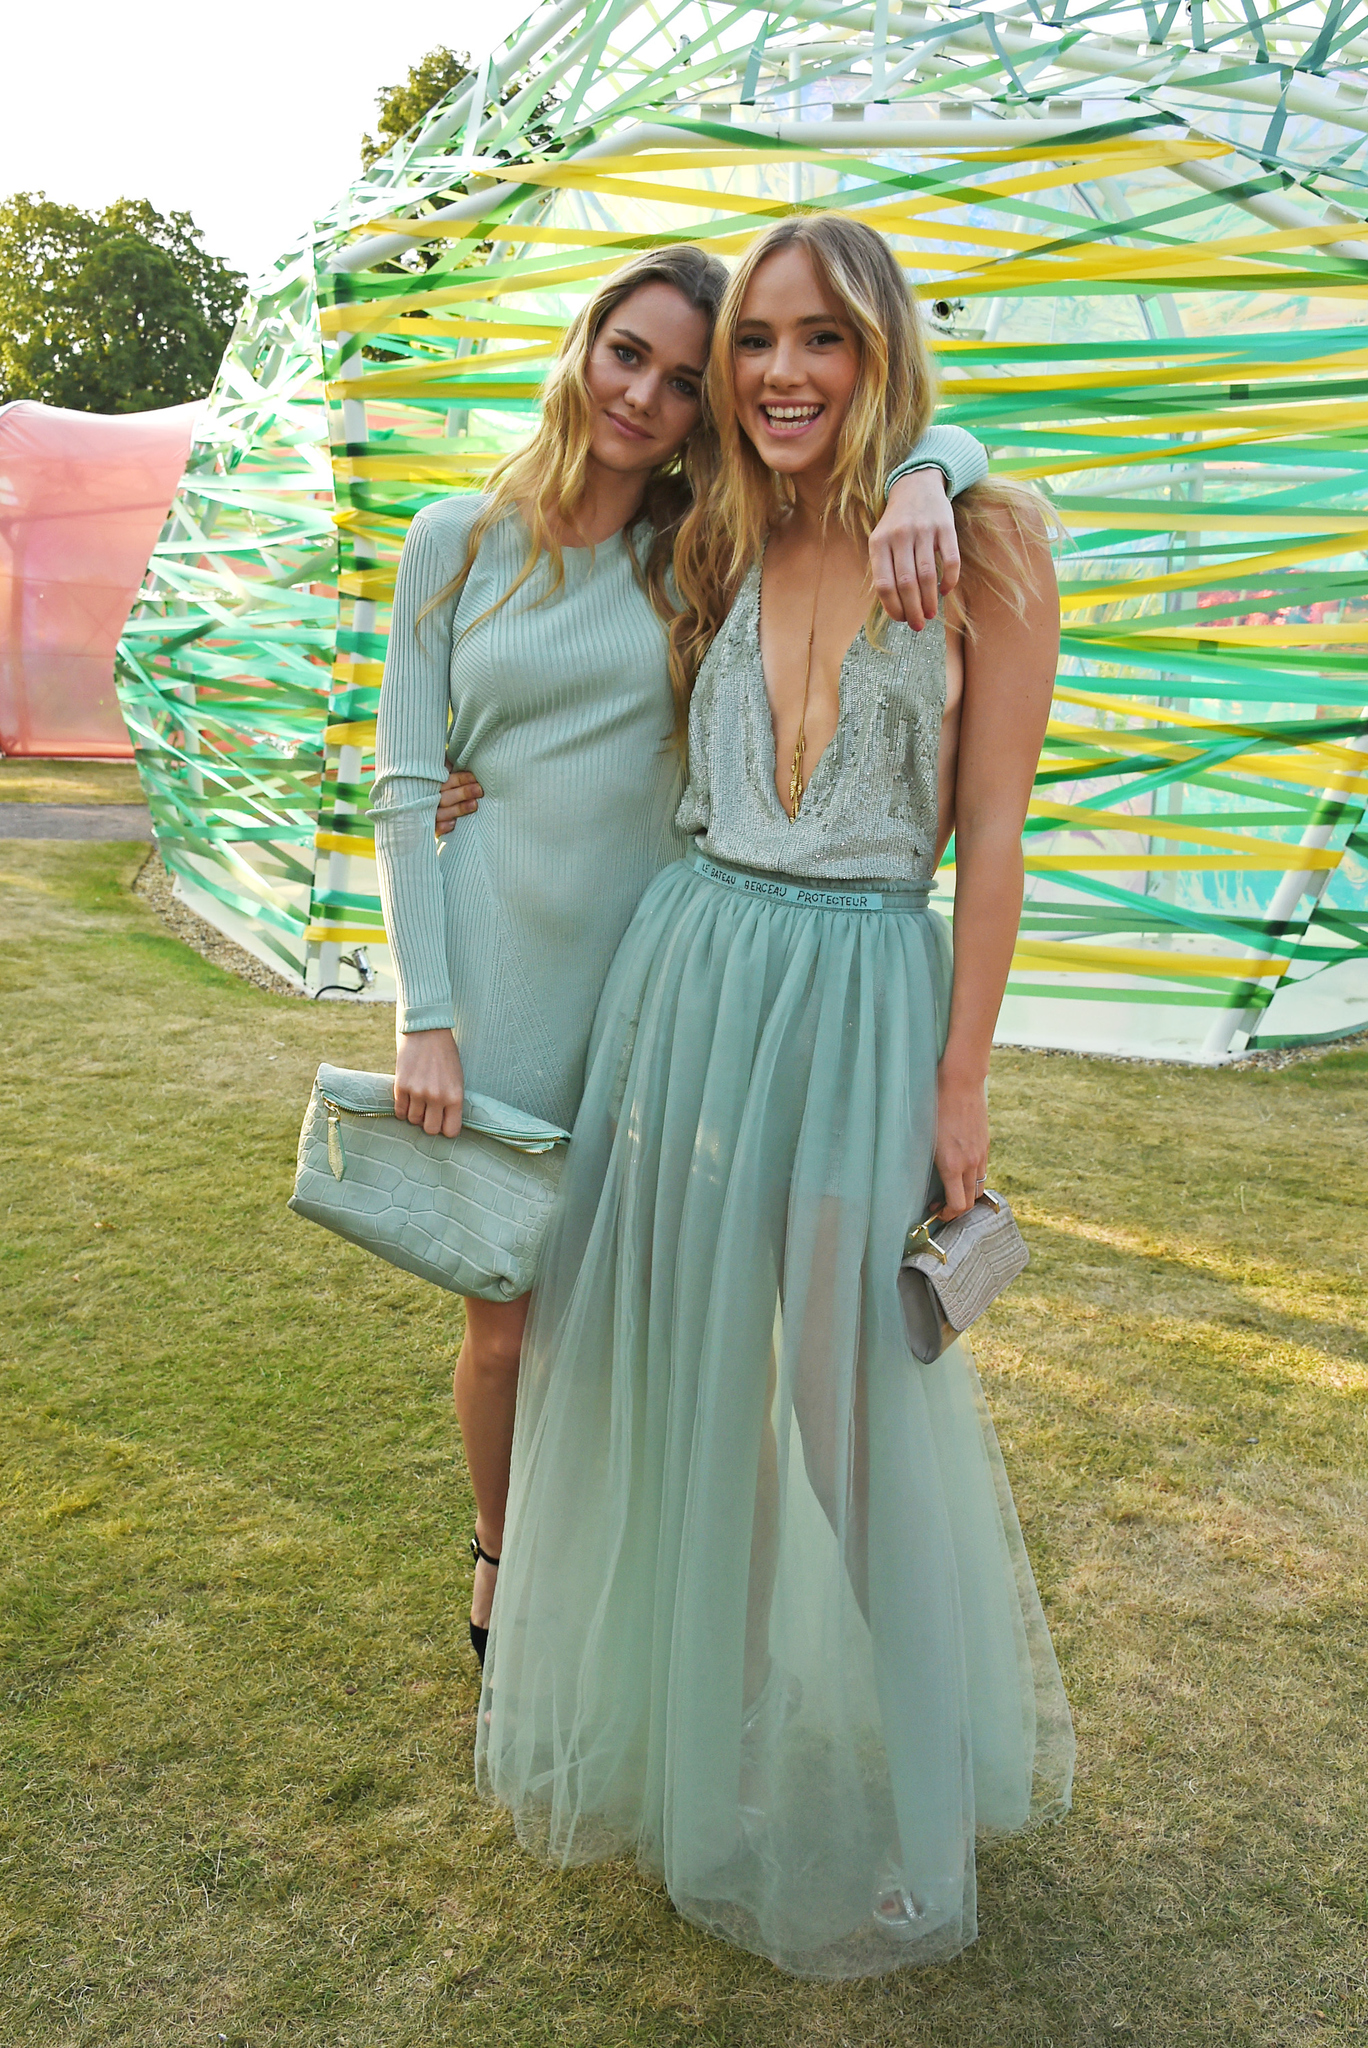 Immy Waterhouse (L) and Suki Waterhouse attend The Serpentine Gallery summer party at The Serpentine Gallery